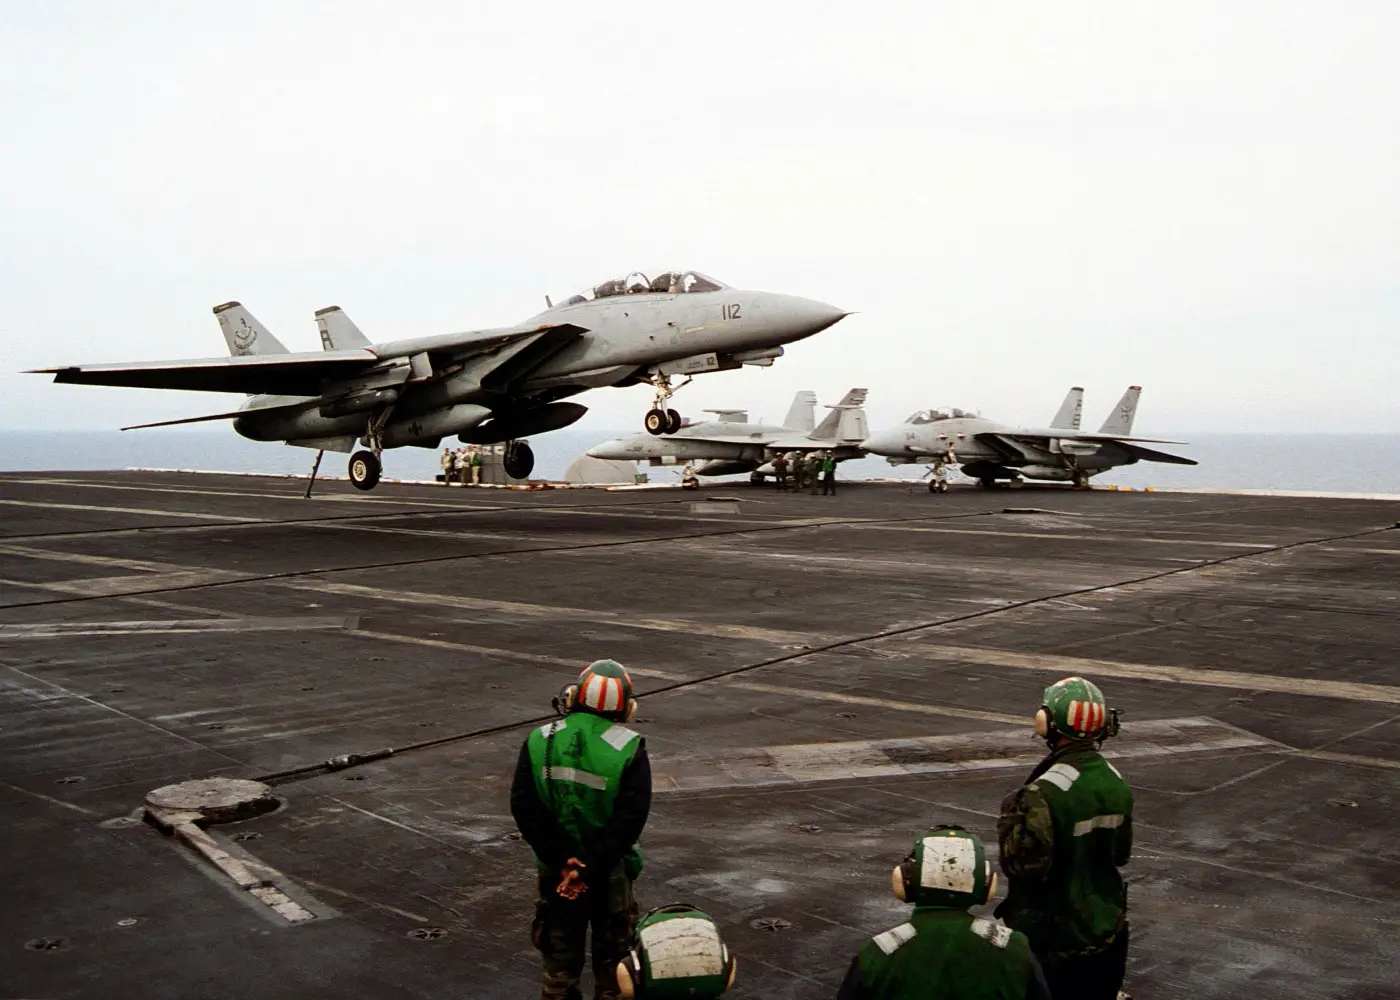 The high F-14 top speed is essential to its operation and winning the fights.